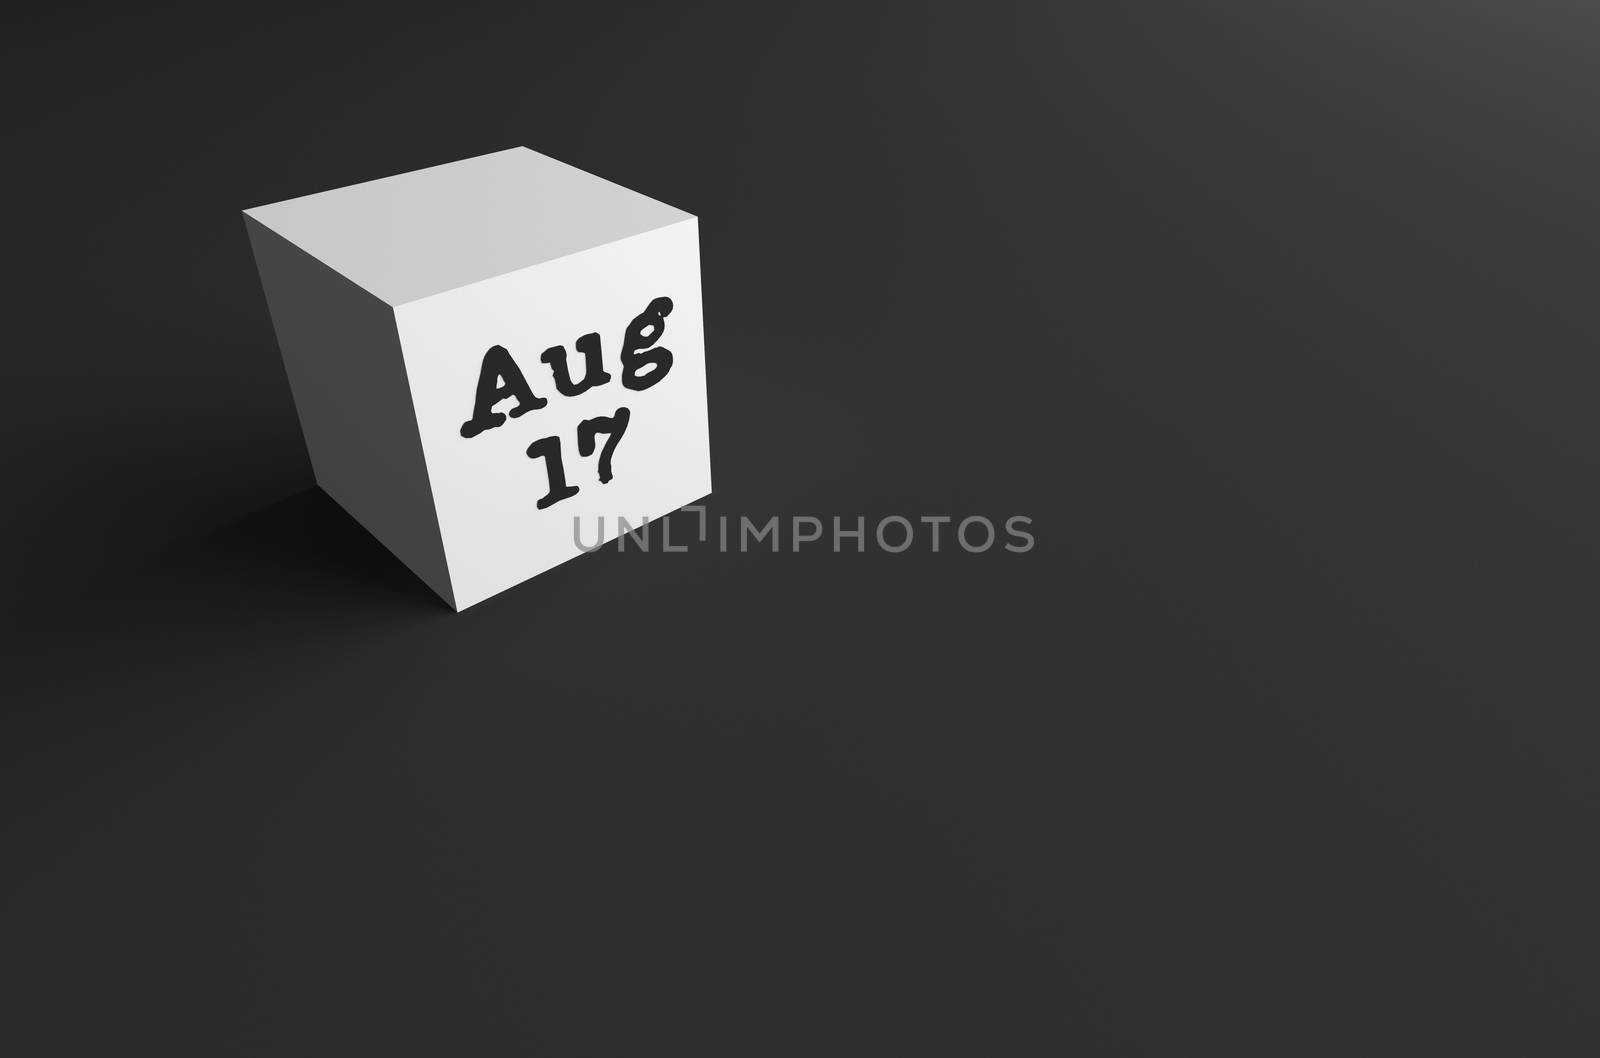 3D RENDERING OF Aug (ABBREVIATION OF AUGUST) 17 ON WHITE CUBE